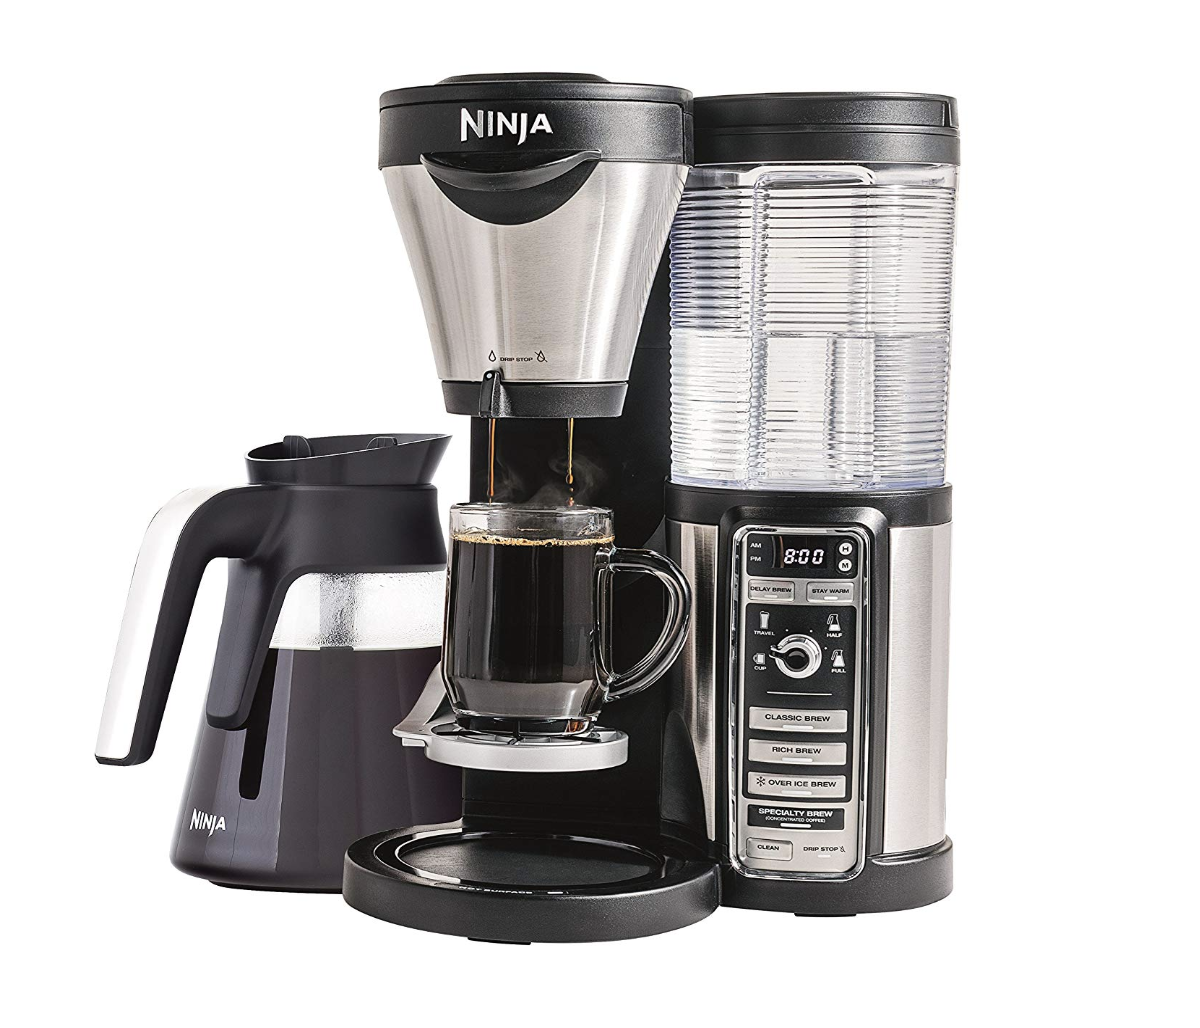 Ninja Coffee Maker for Hot/Iced/Frozen Coffee with Four Brew Sizes